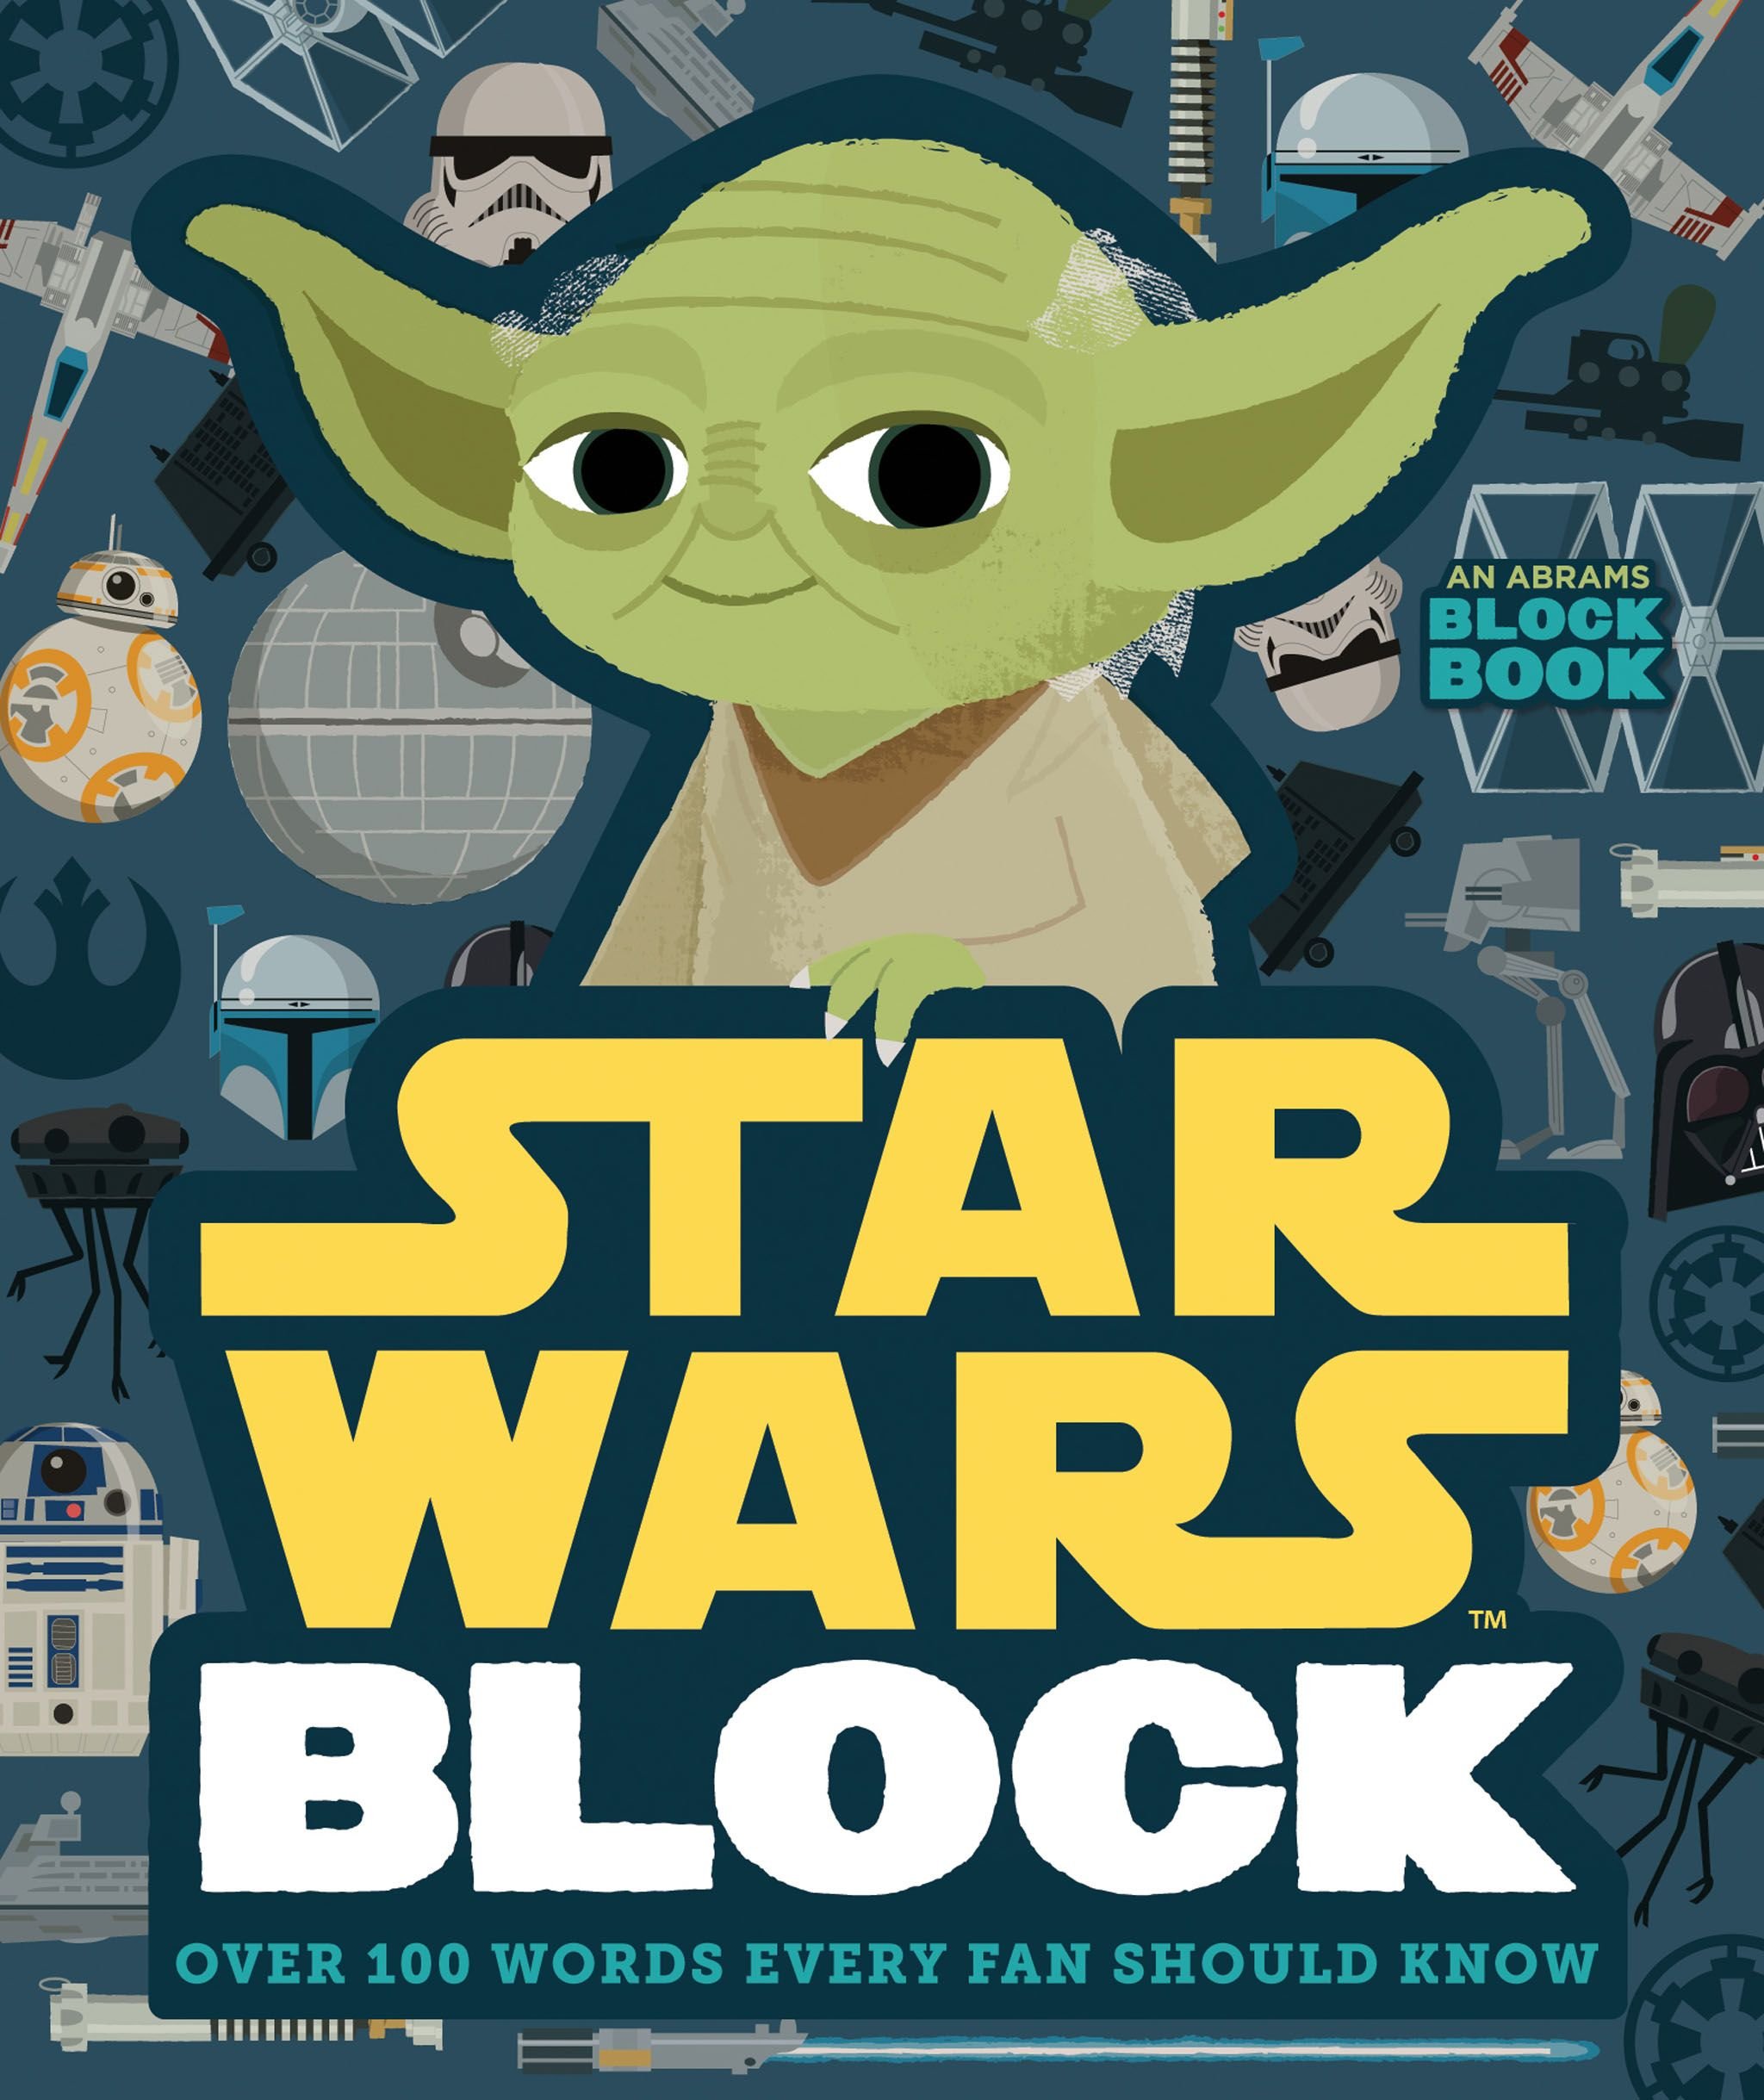 Buy　Free　Star　Wars　by　Block　With　Peskimo　(Firm)　(artist)　Delivery